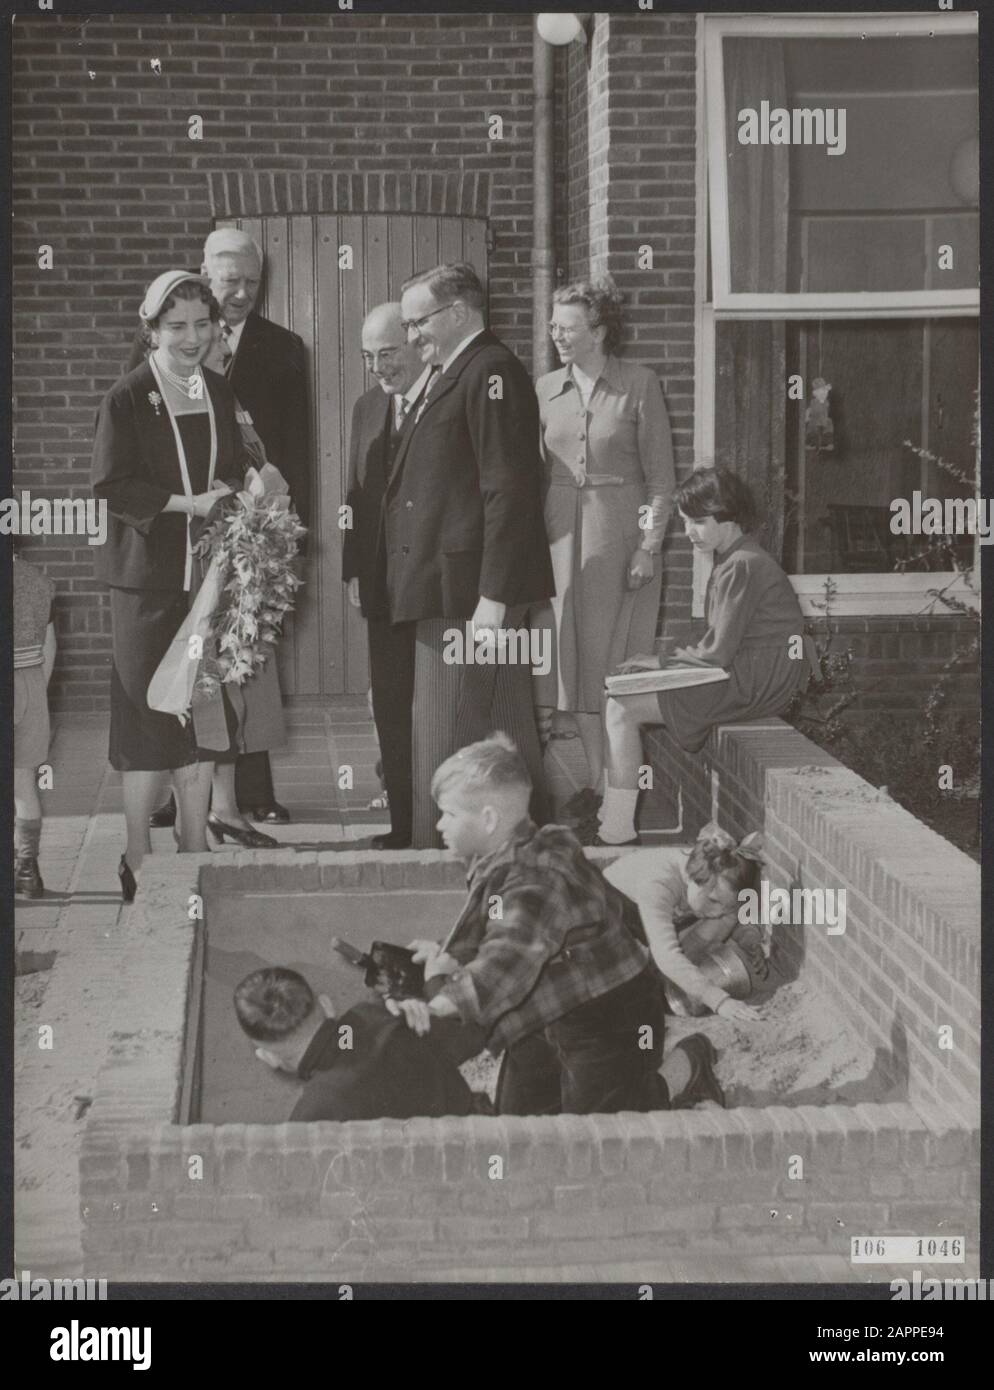 State visit by the Danish King's couple to our country from 26 to 28 April 1954. Queen Ingrid with the children while playing in the sandbox Date: 28 April 1954 Location: Denmark, Houses, Noord-Holland Keywords: blind, kings, games, state visits Personal name: Ingrid queen Stock Photo